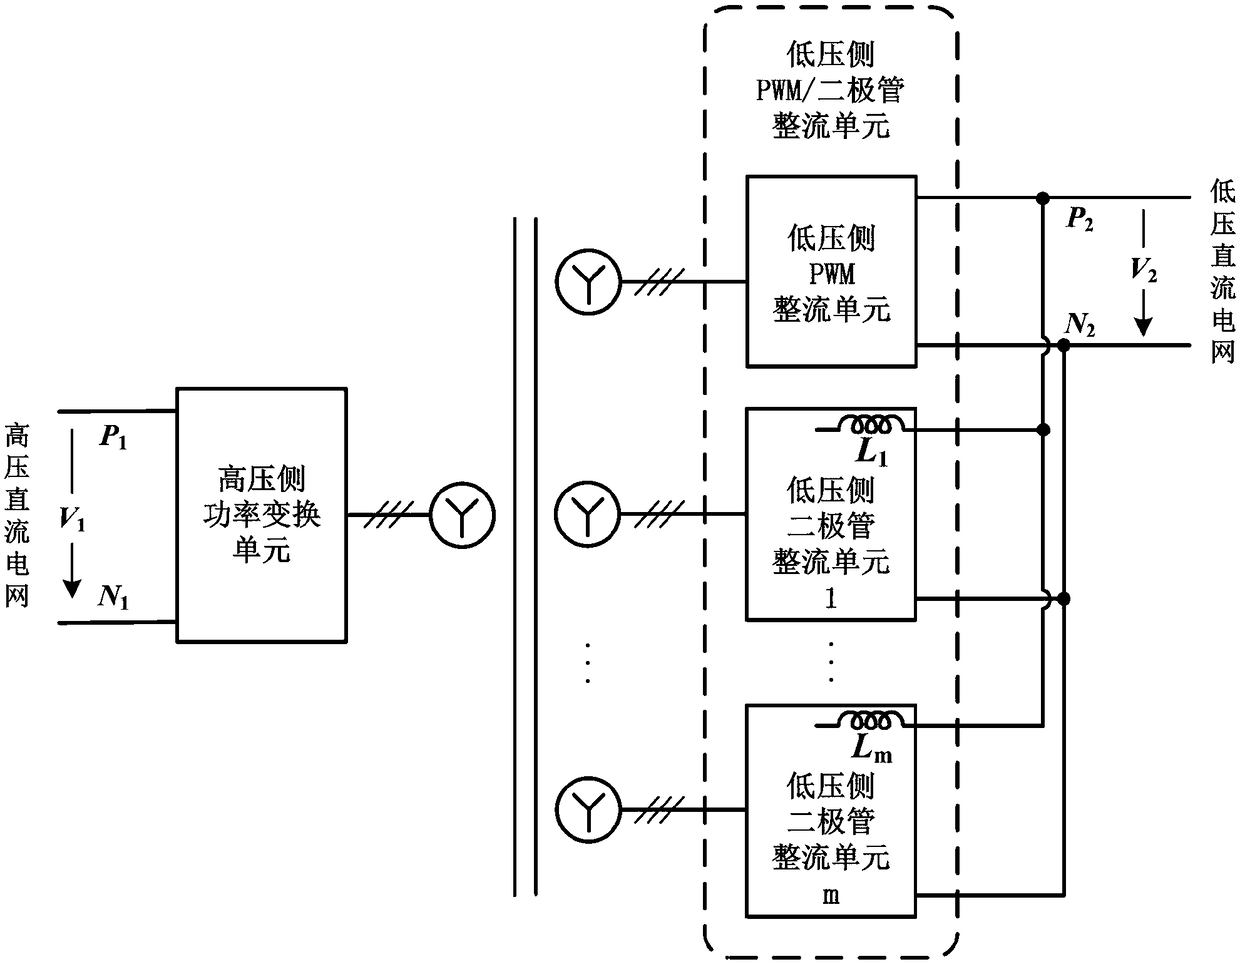 DC power distribution network energy router based on PWM/diode hybrid rectification structure, and control method for DC power distribution network energy router